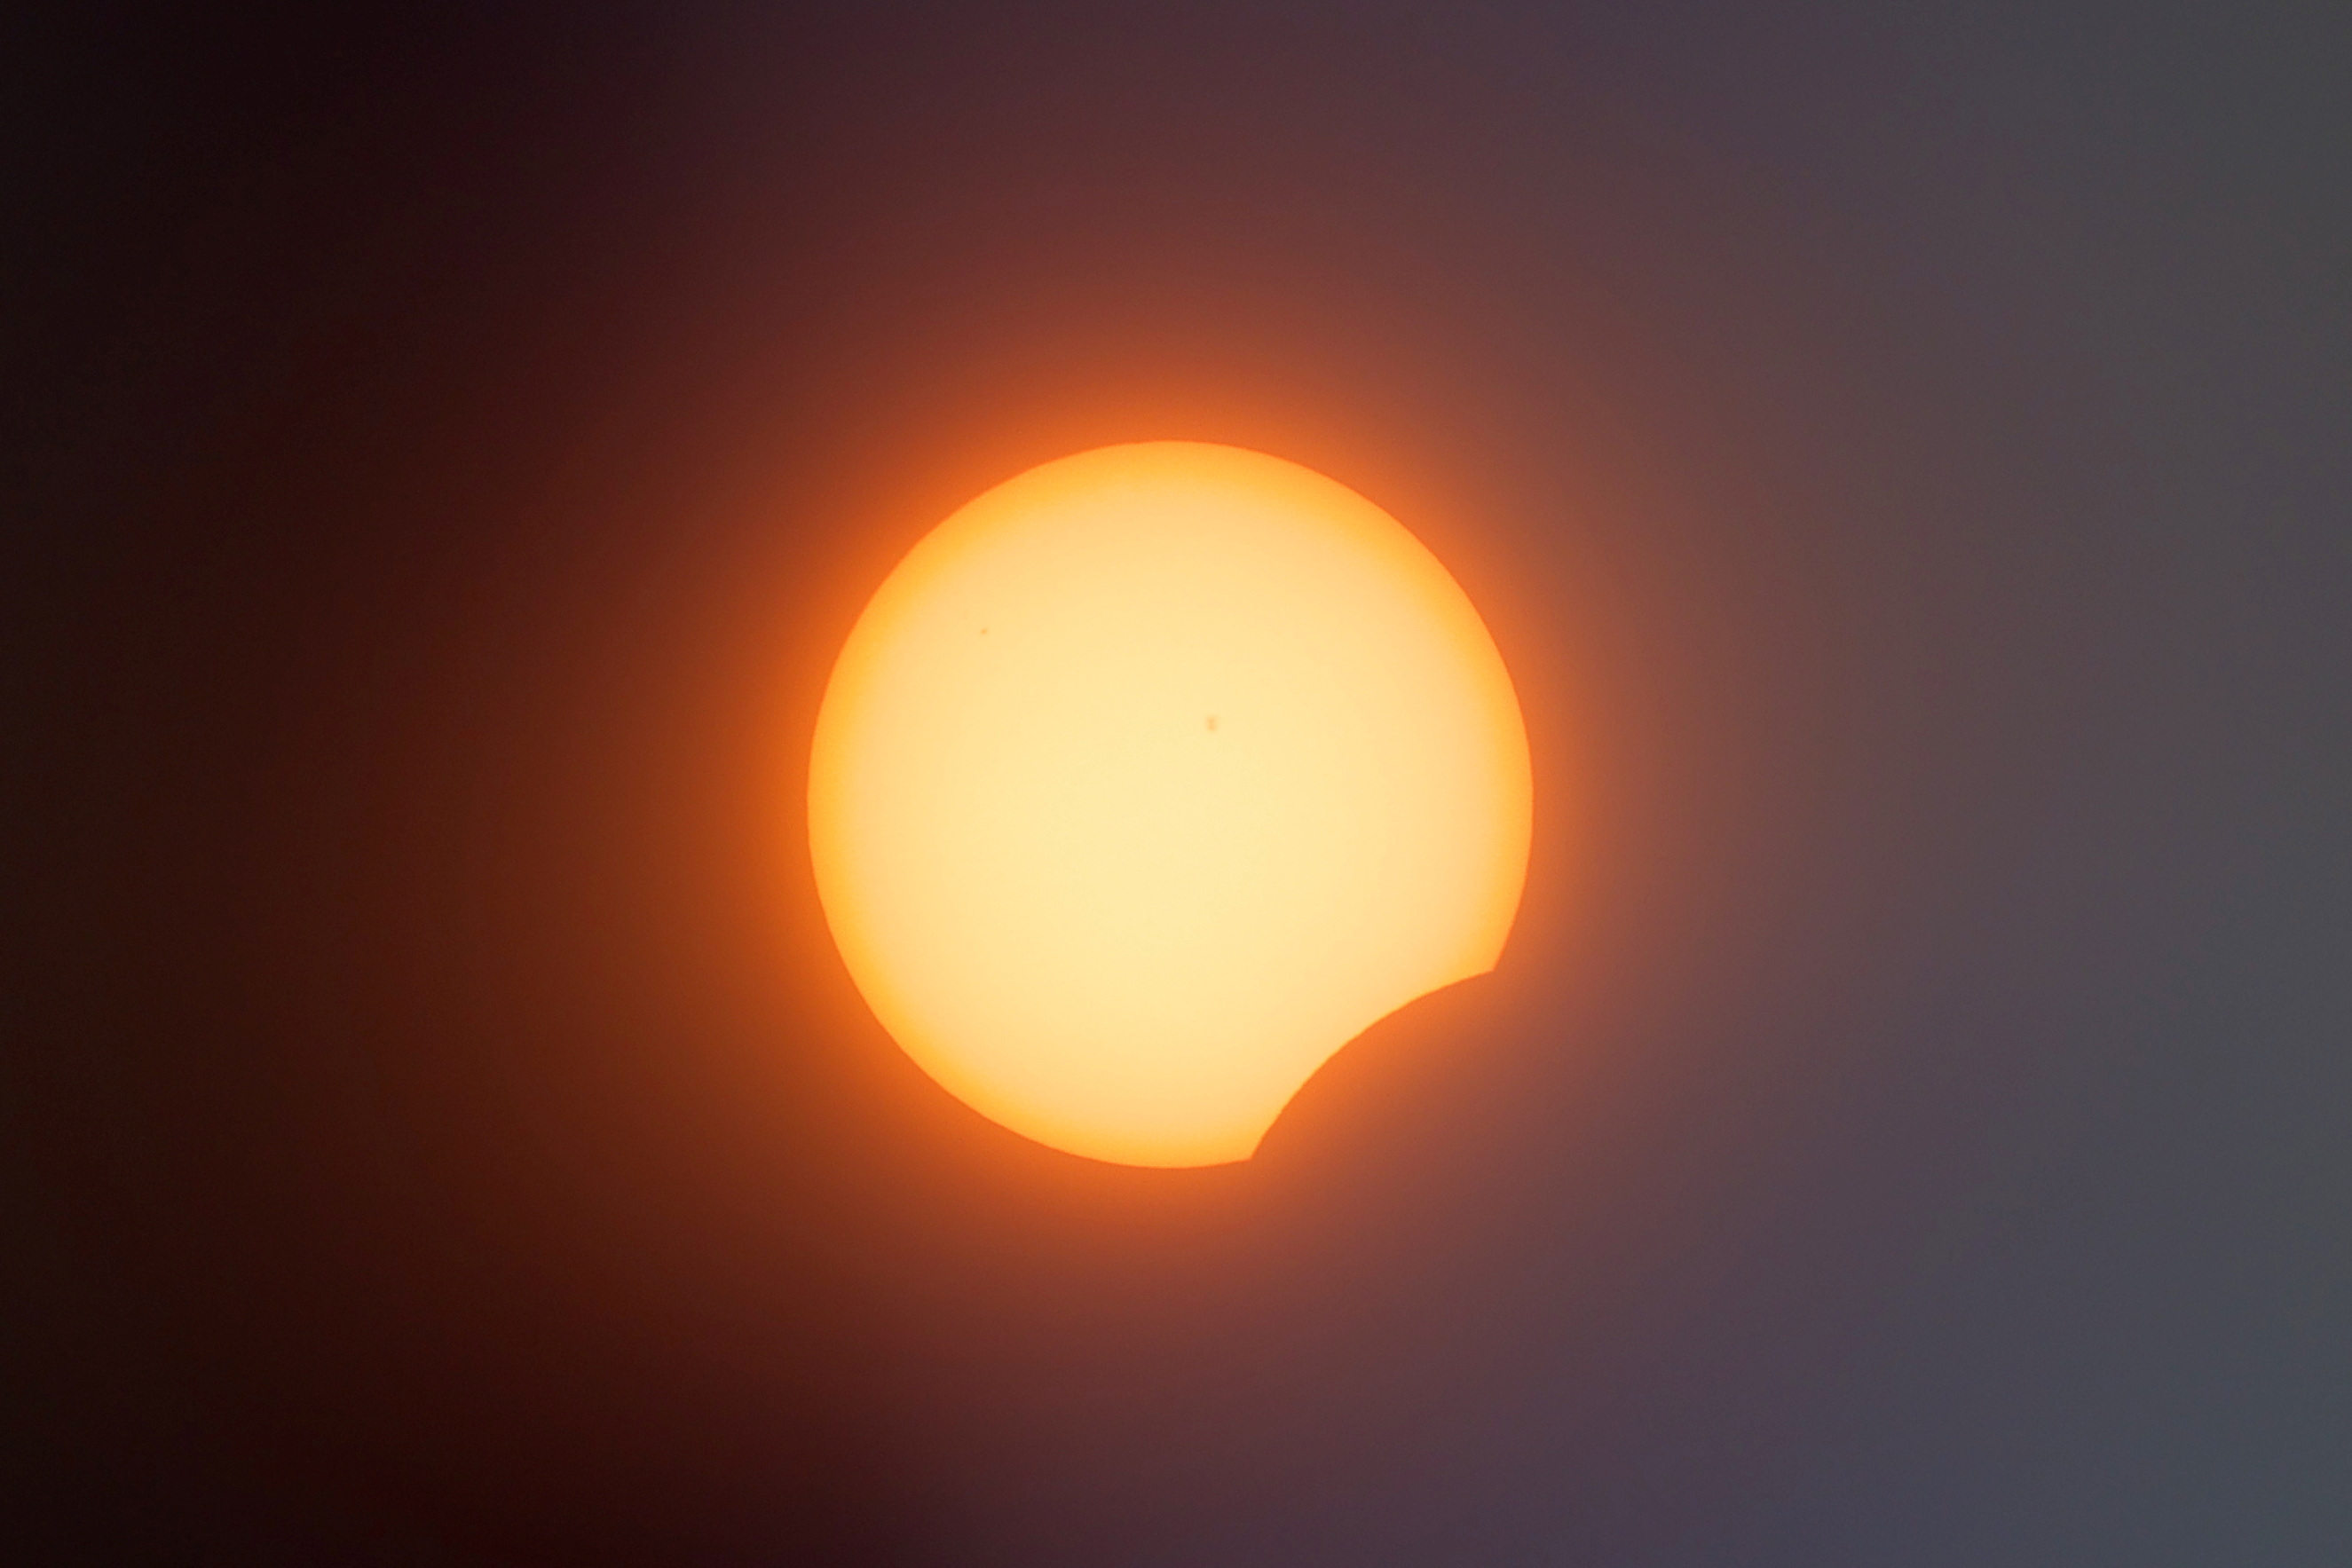 Partial solar eclipse in New York City